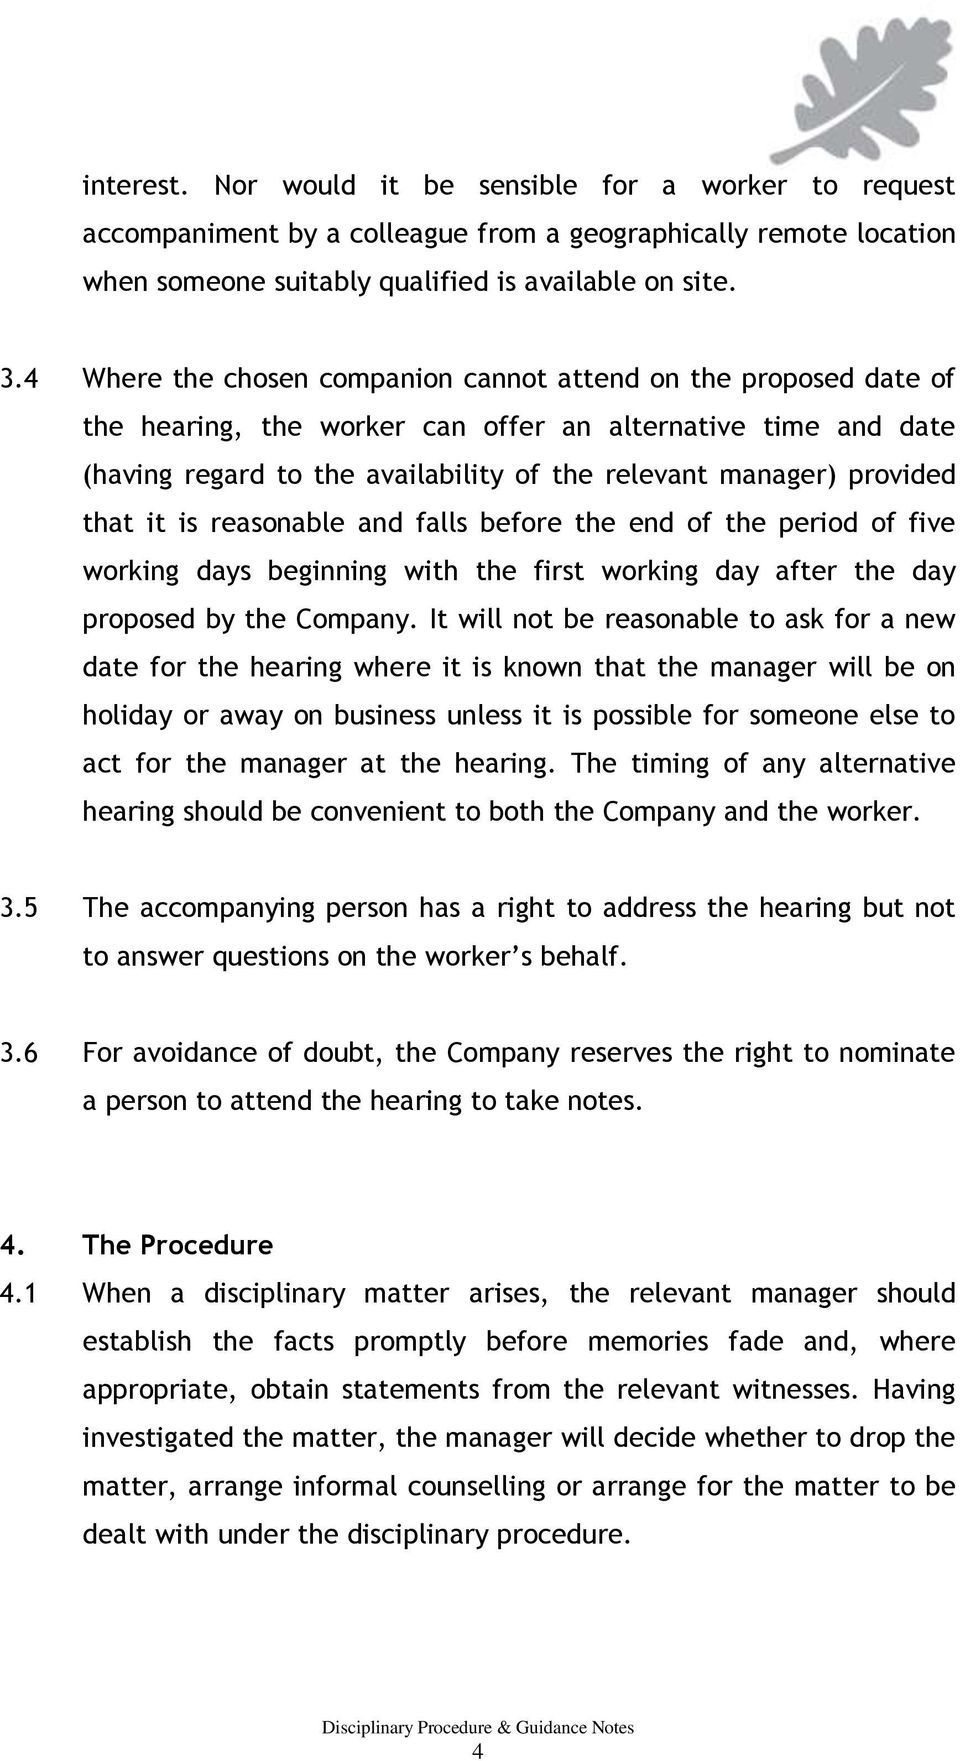 that it is reasonable and falls before the end of the period of five working days beginning with the first working day after the day proposed by the Company.